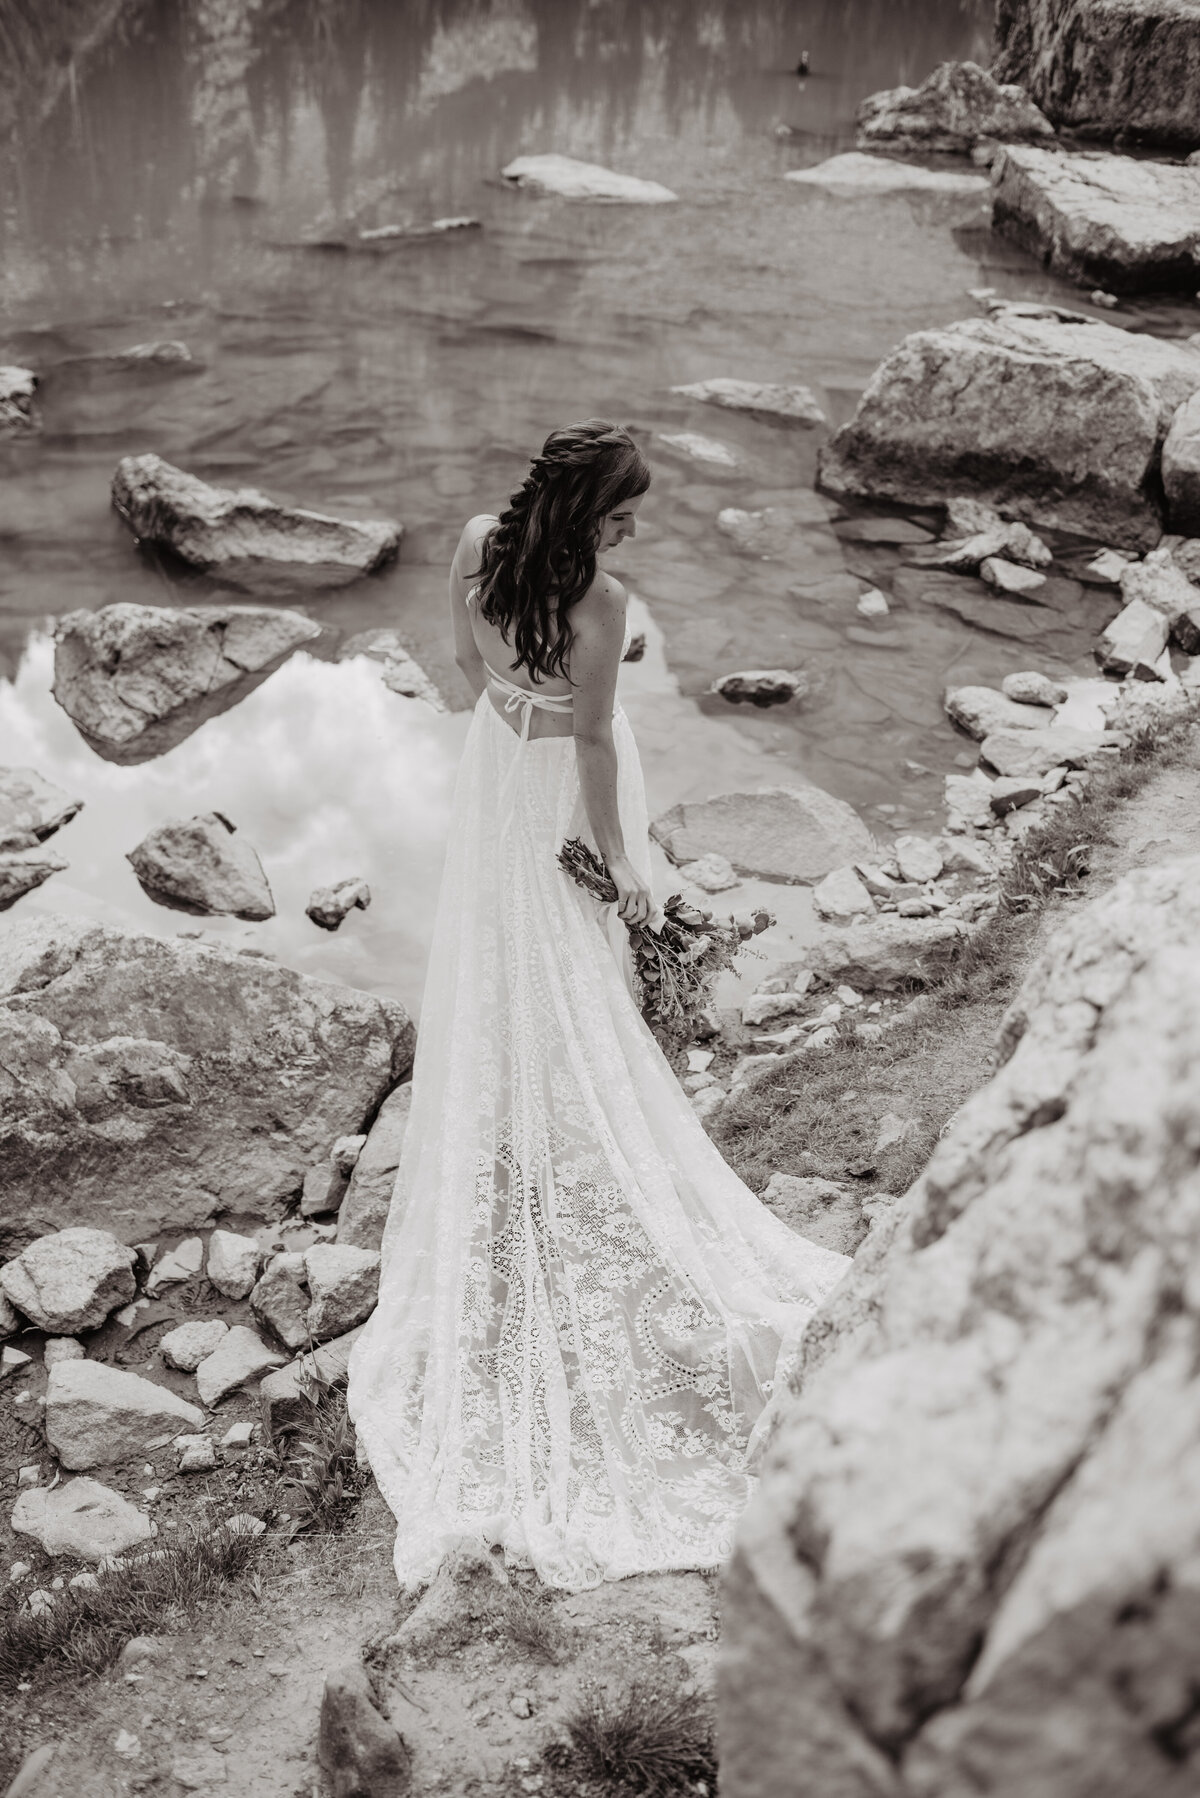 Jackson Hole Photographers capture bride with back to camera in black and white portrait